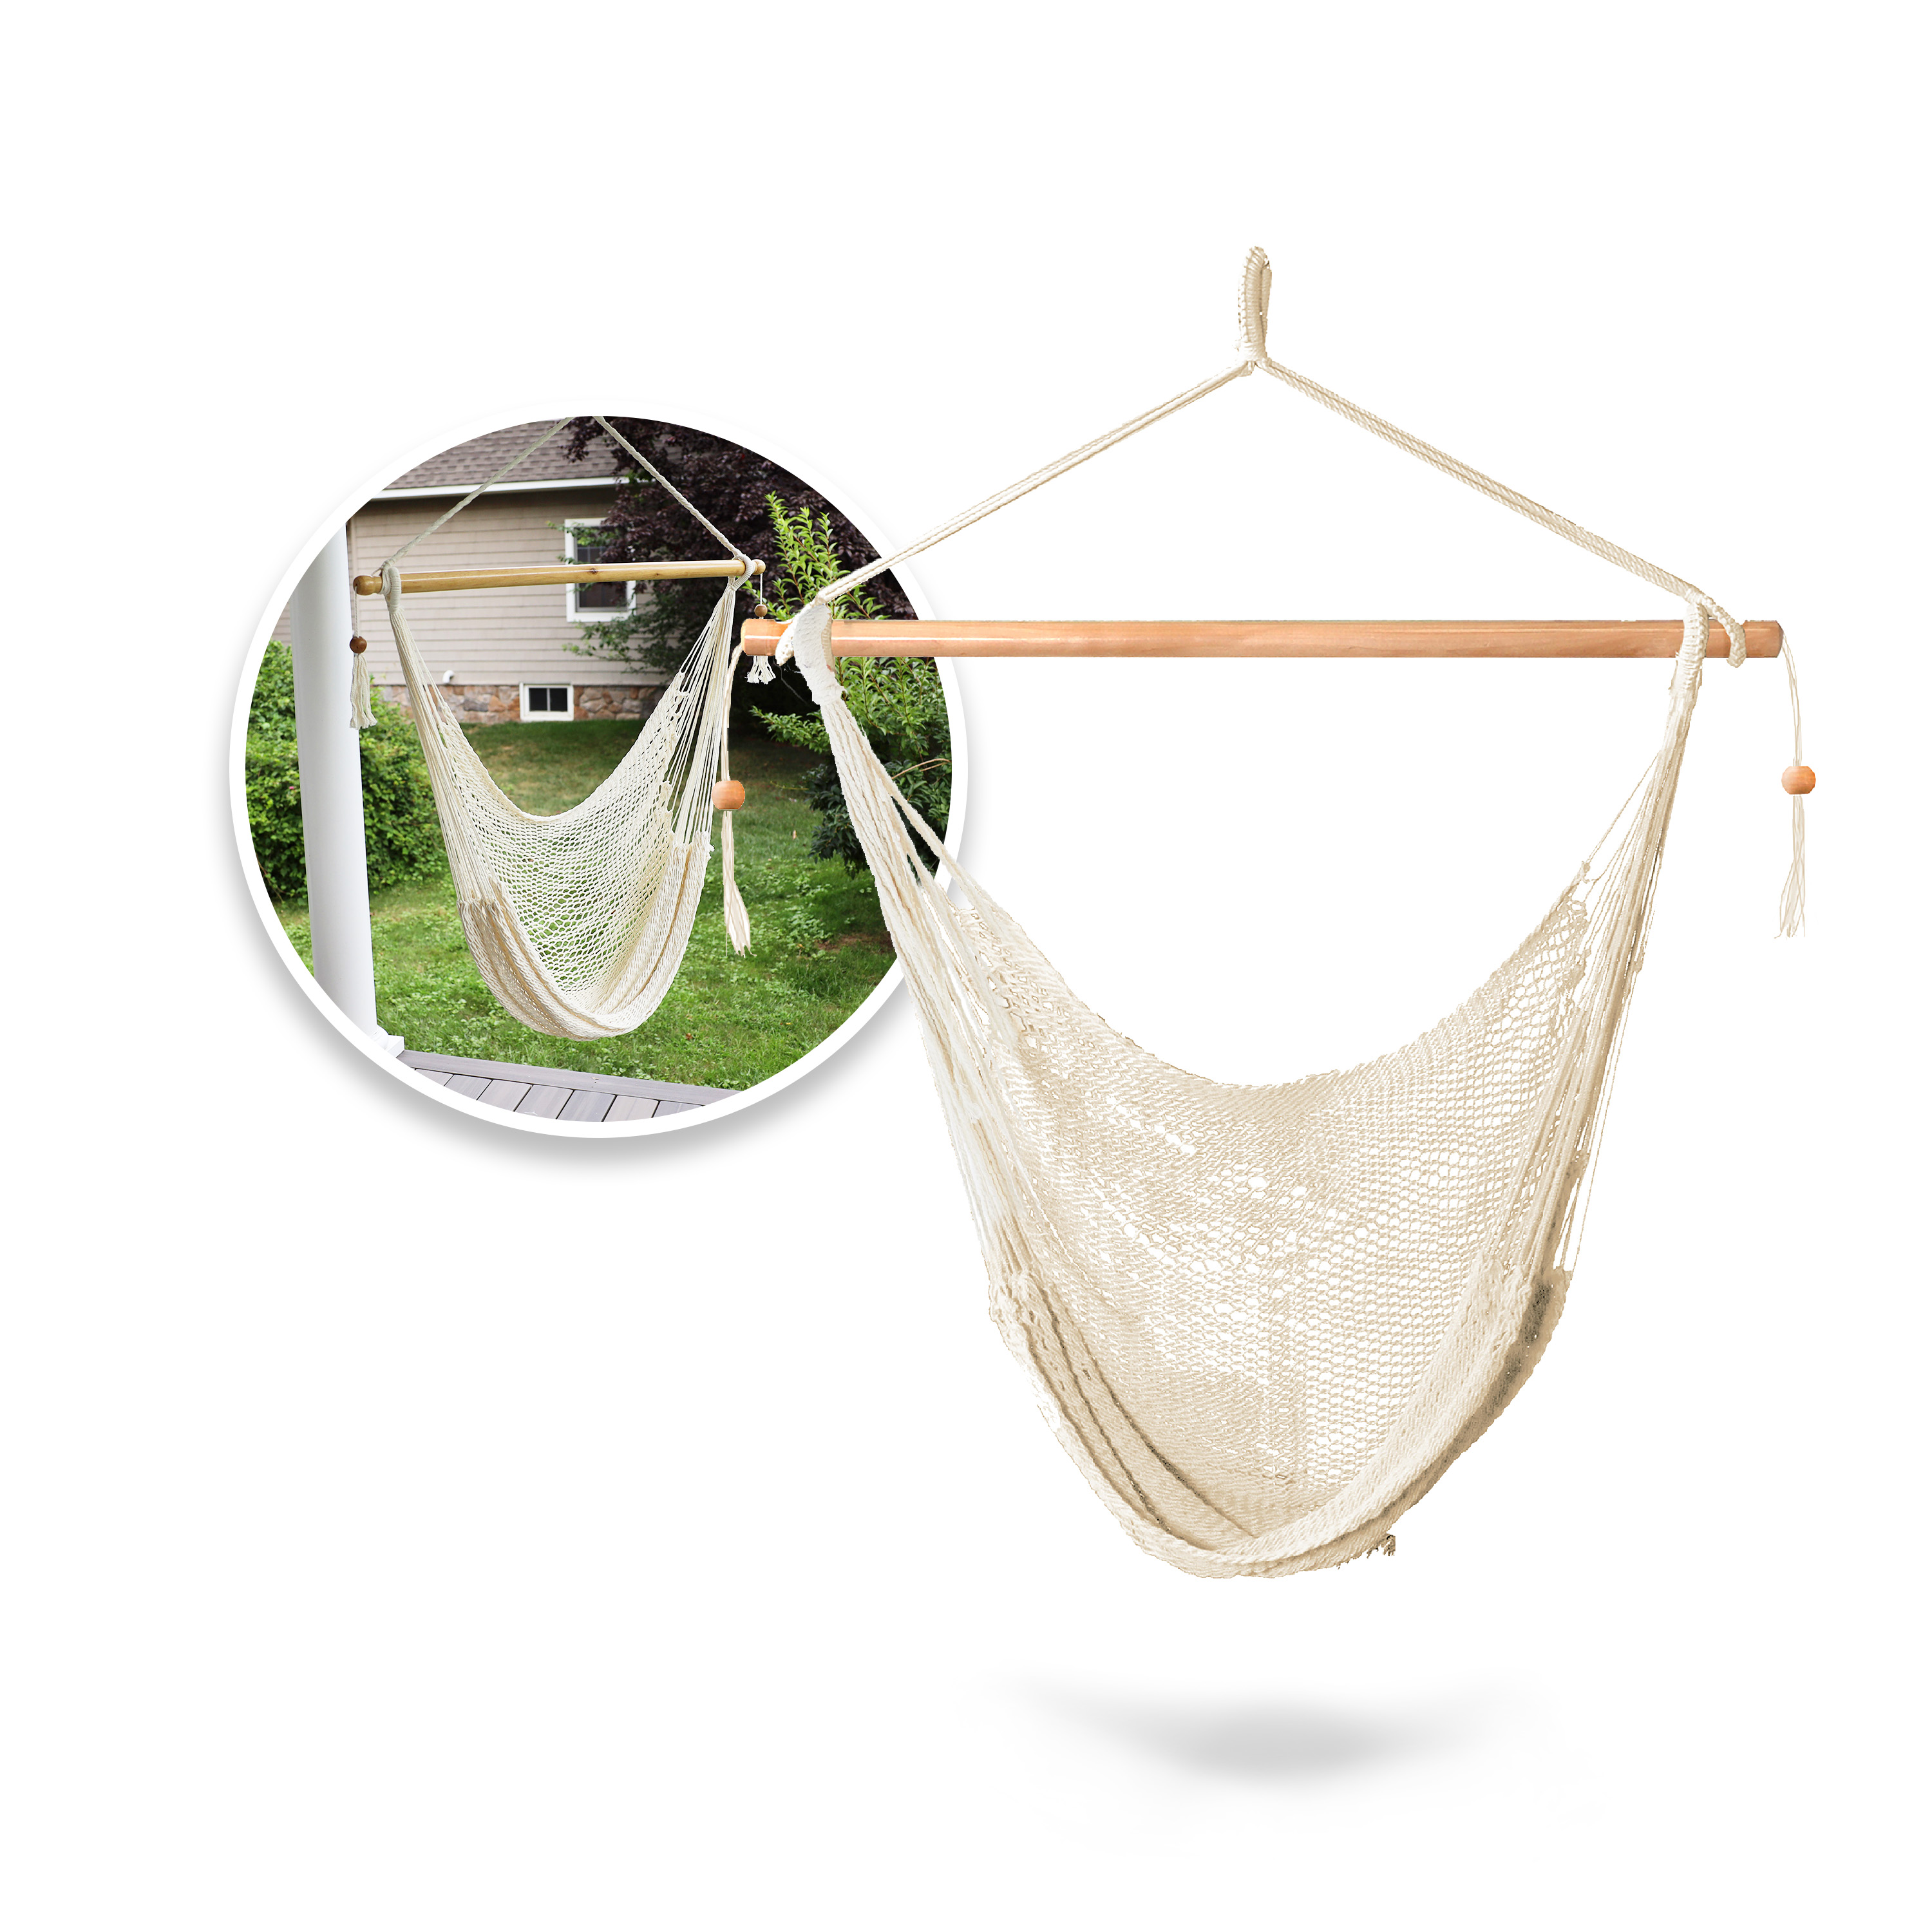 Bliss Hammocks BHC-412PR Island Rope Hammock Chair, Eco Friendly ＆  Hand-Woven Cotton, Varnish Coated 40 Inch Wood Spreader, Easy w/Included  Hanging K テーブル、チェア、ハンモック